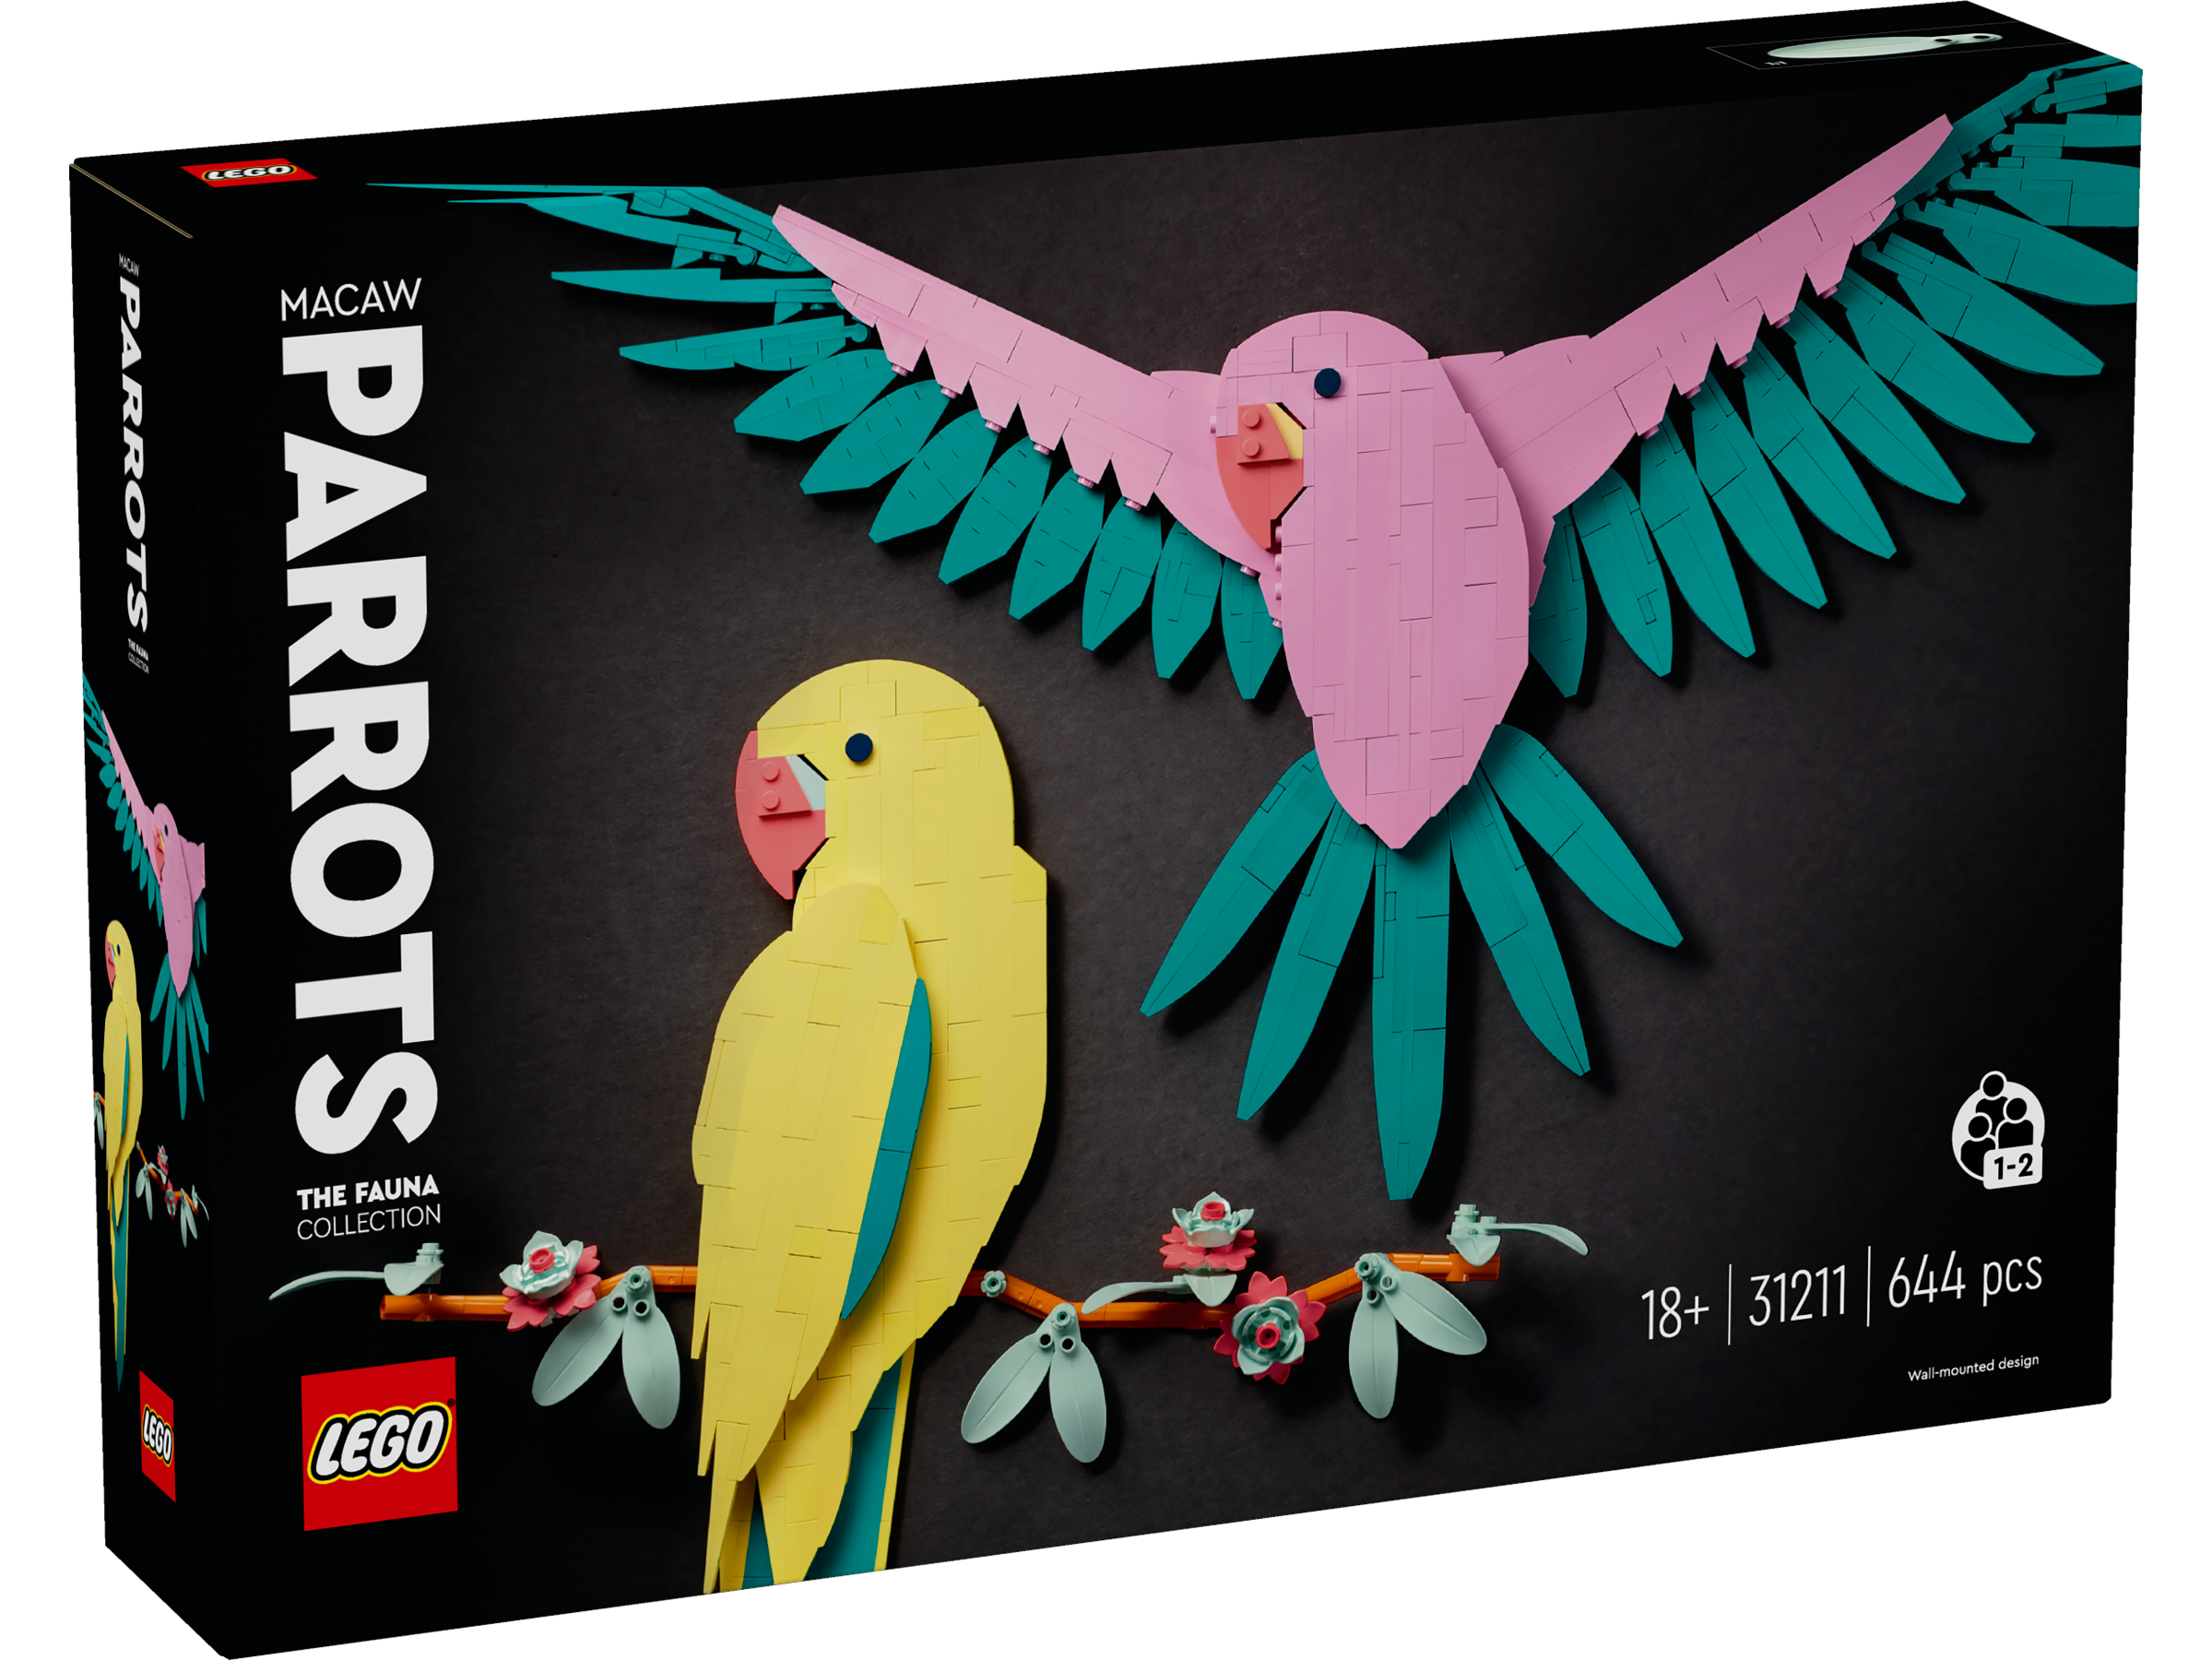 Lego 31211 The Fauna Collection Macaw Parrots